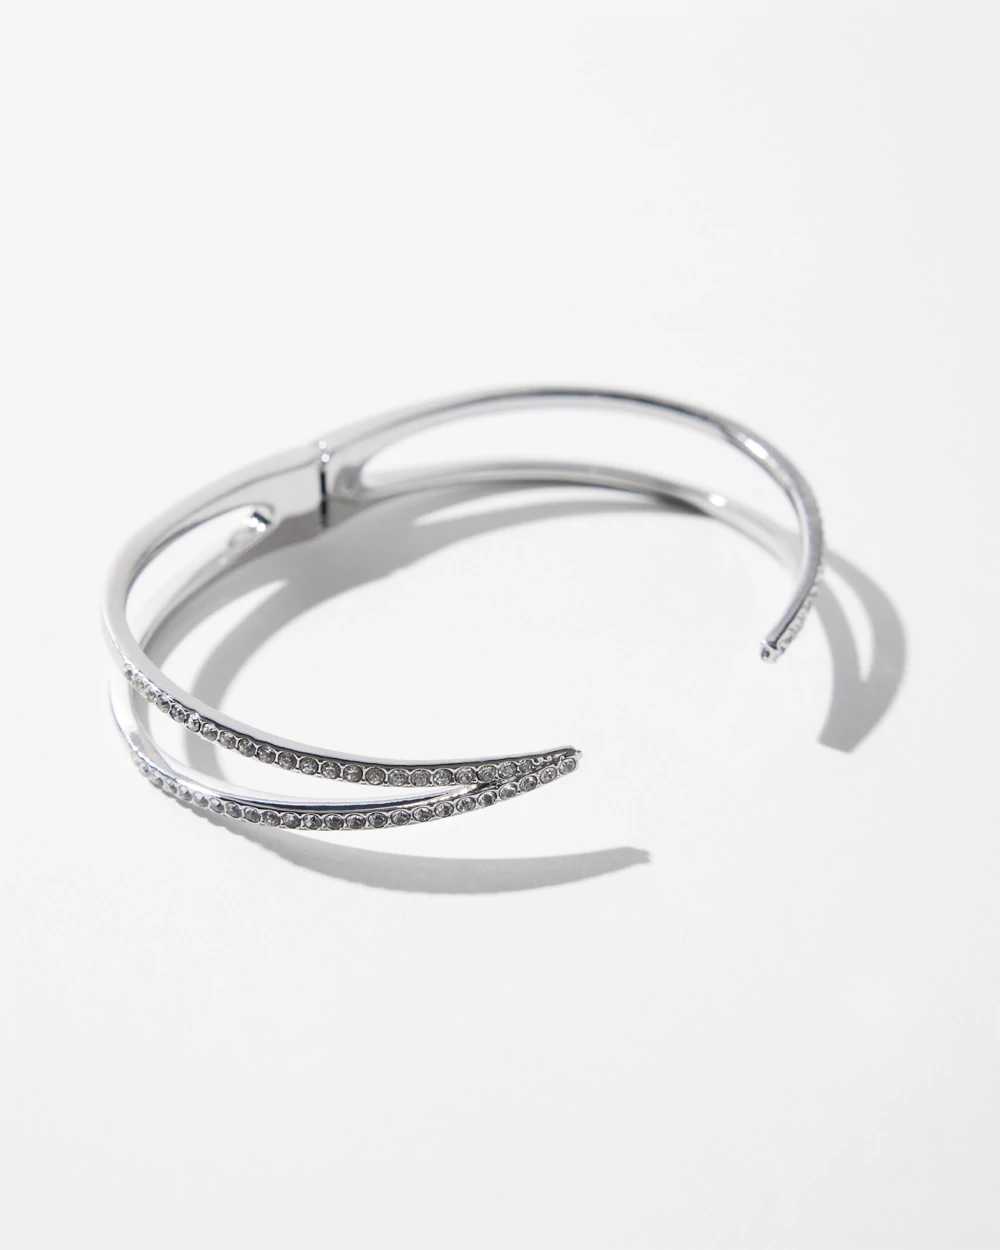 Silver Criss-Cross Hinge Bracelet click to view larger image.